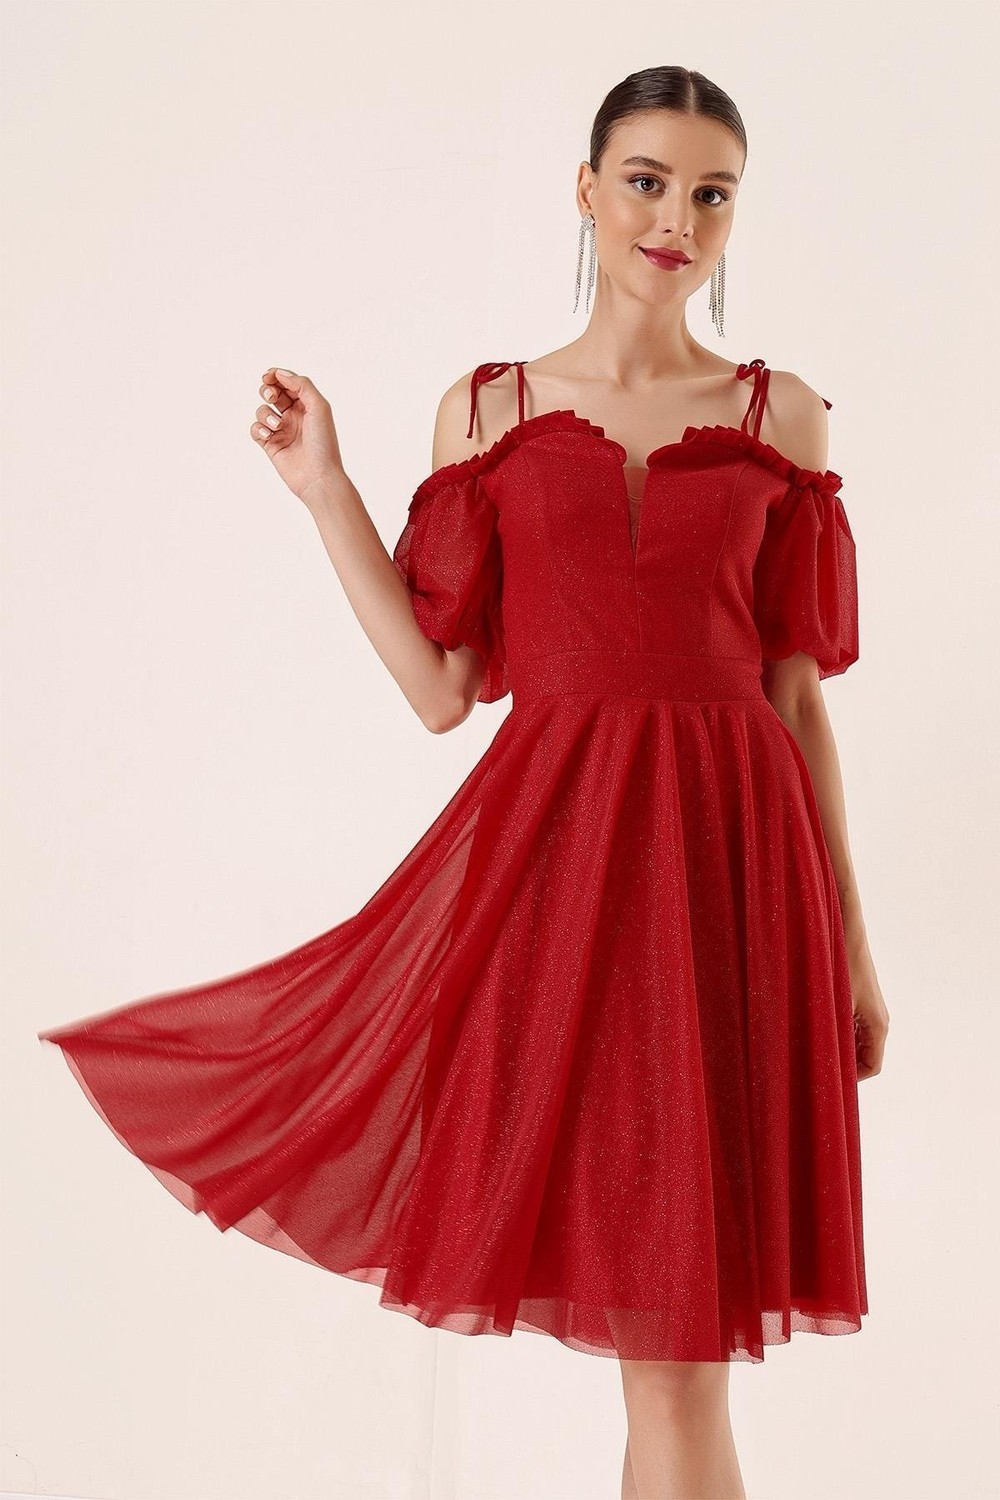 By Saygı Pleated Collar With Balloon Sleeves Lined Silvery Tulle Dress Red